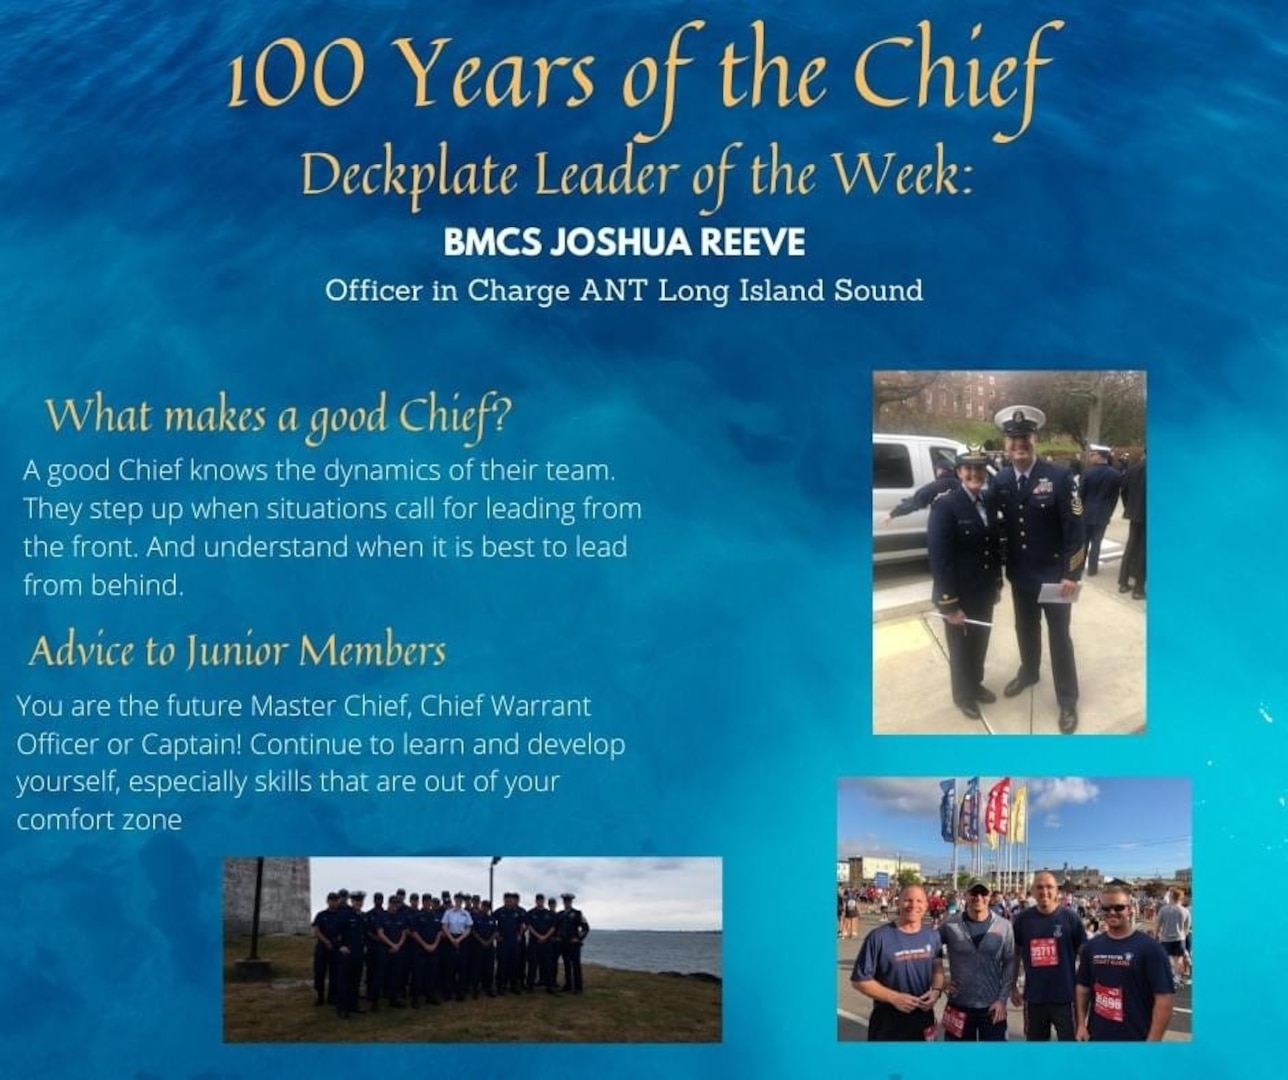 Deckplate Leader of the Week is Senior Chief Petty officer Joshua Reeve, the officer in charge of Coast Guard Aids to Navigation Team Long Island Sound and the vice president of the New Haven Chief Petty Officers Academy Chapter.